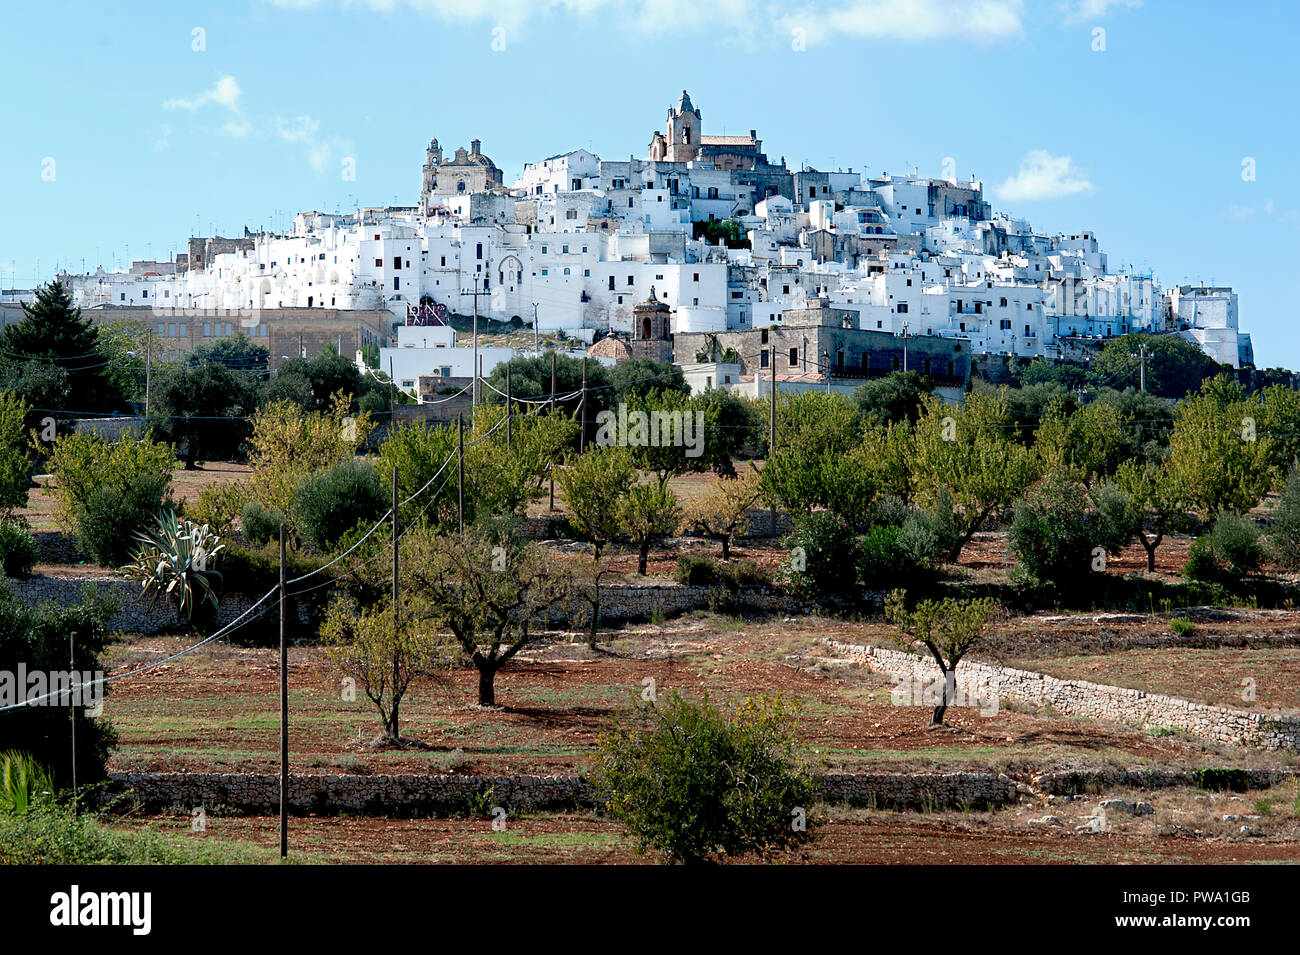 The picturesque old town and citadel of Ostuni, built on top of a hill and surrounded by olive groves; it is commonly referred to as 'the White City'. Stock Photo